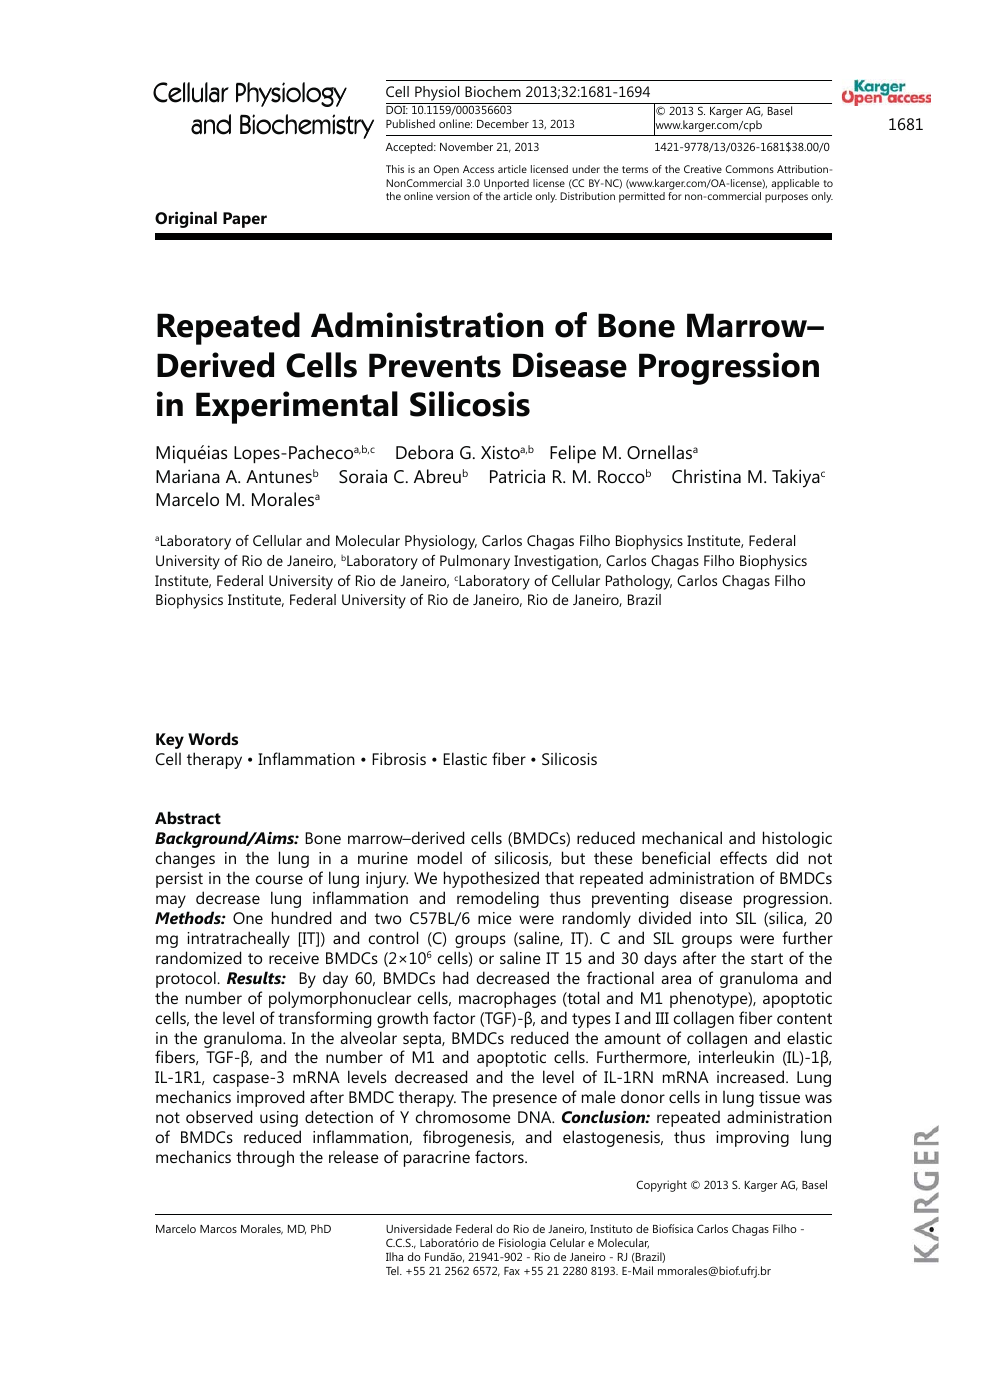 Repeated Administration Of Bone Marrow Derived Cells Prevents Disease Progression In Experimental Silicosis Topic Of Research Paper In Medical Engineering Download Scholarly Article Pdf And Read For Free On Cyberleninka Open Science